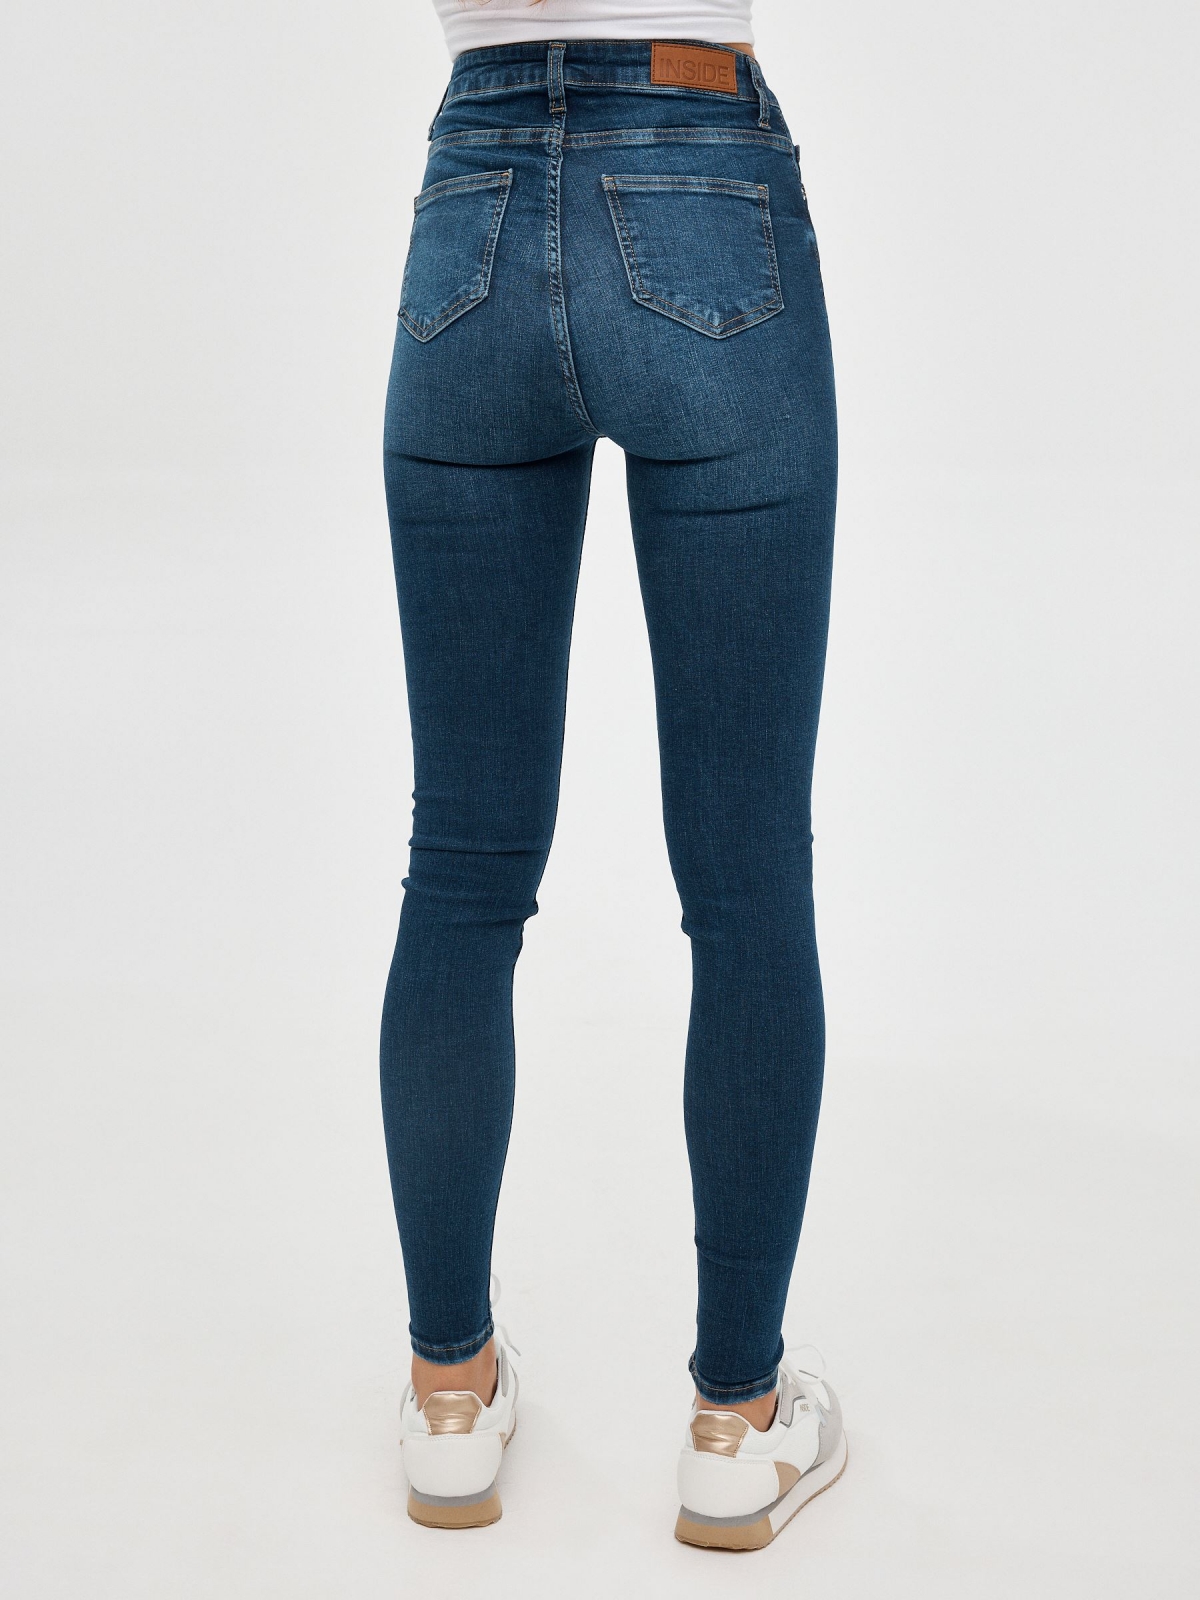 High rise skinny jeans dark blue middle back view